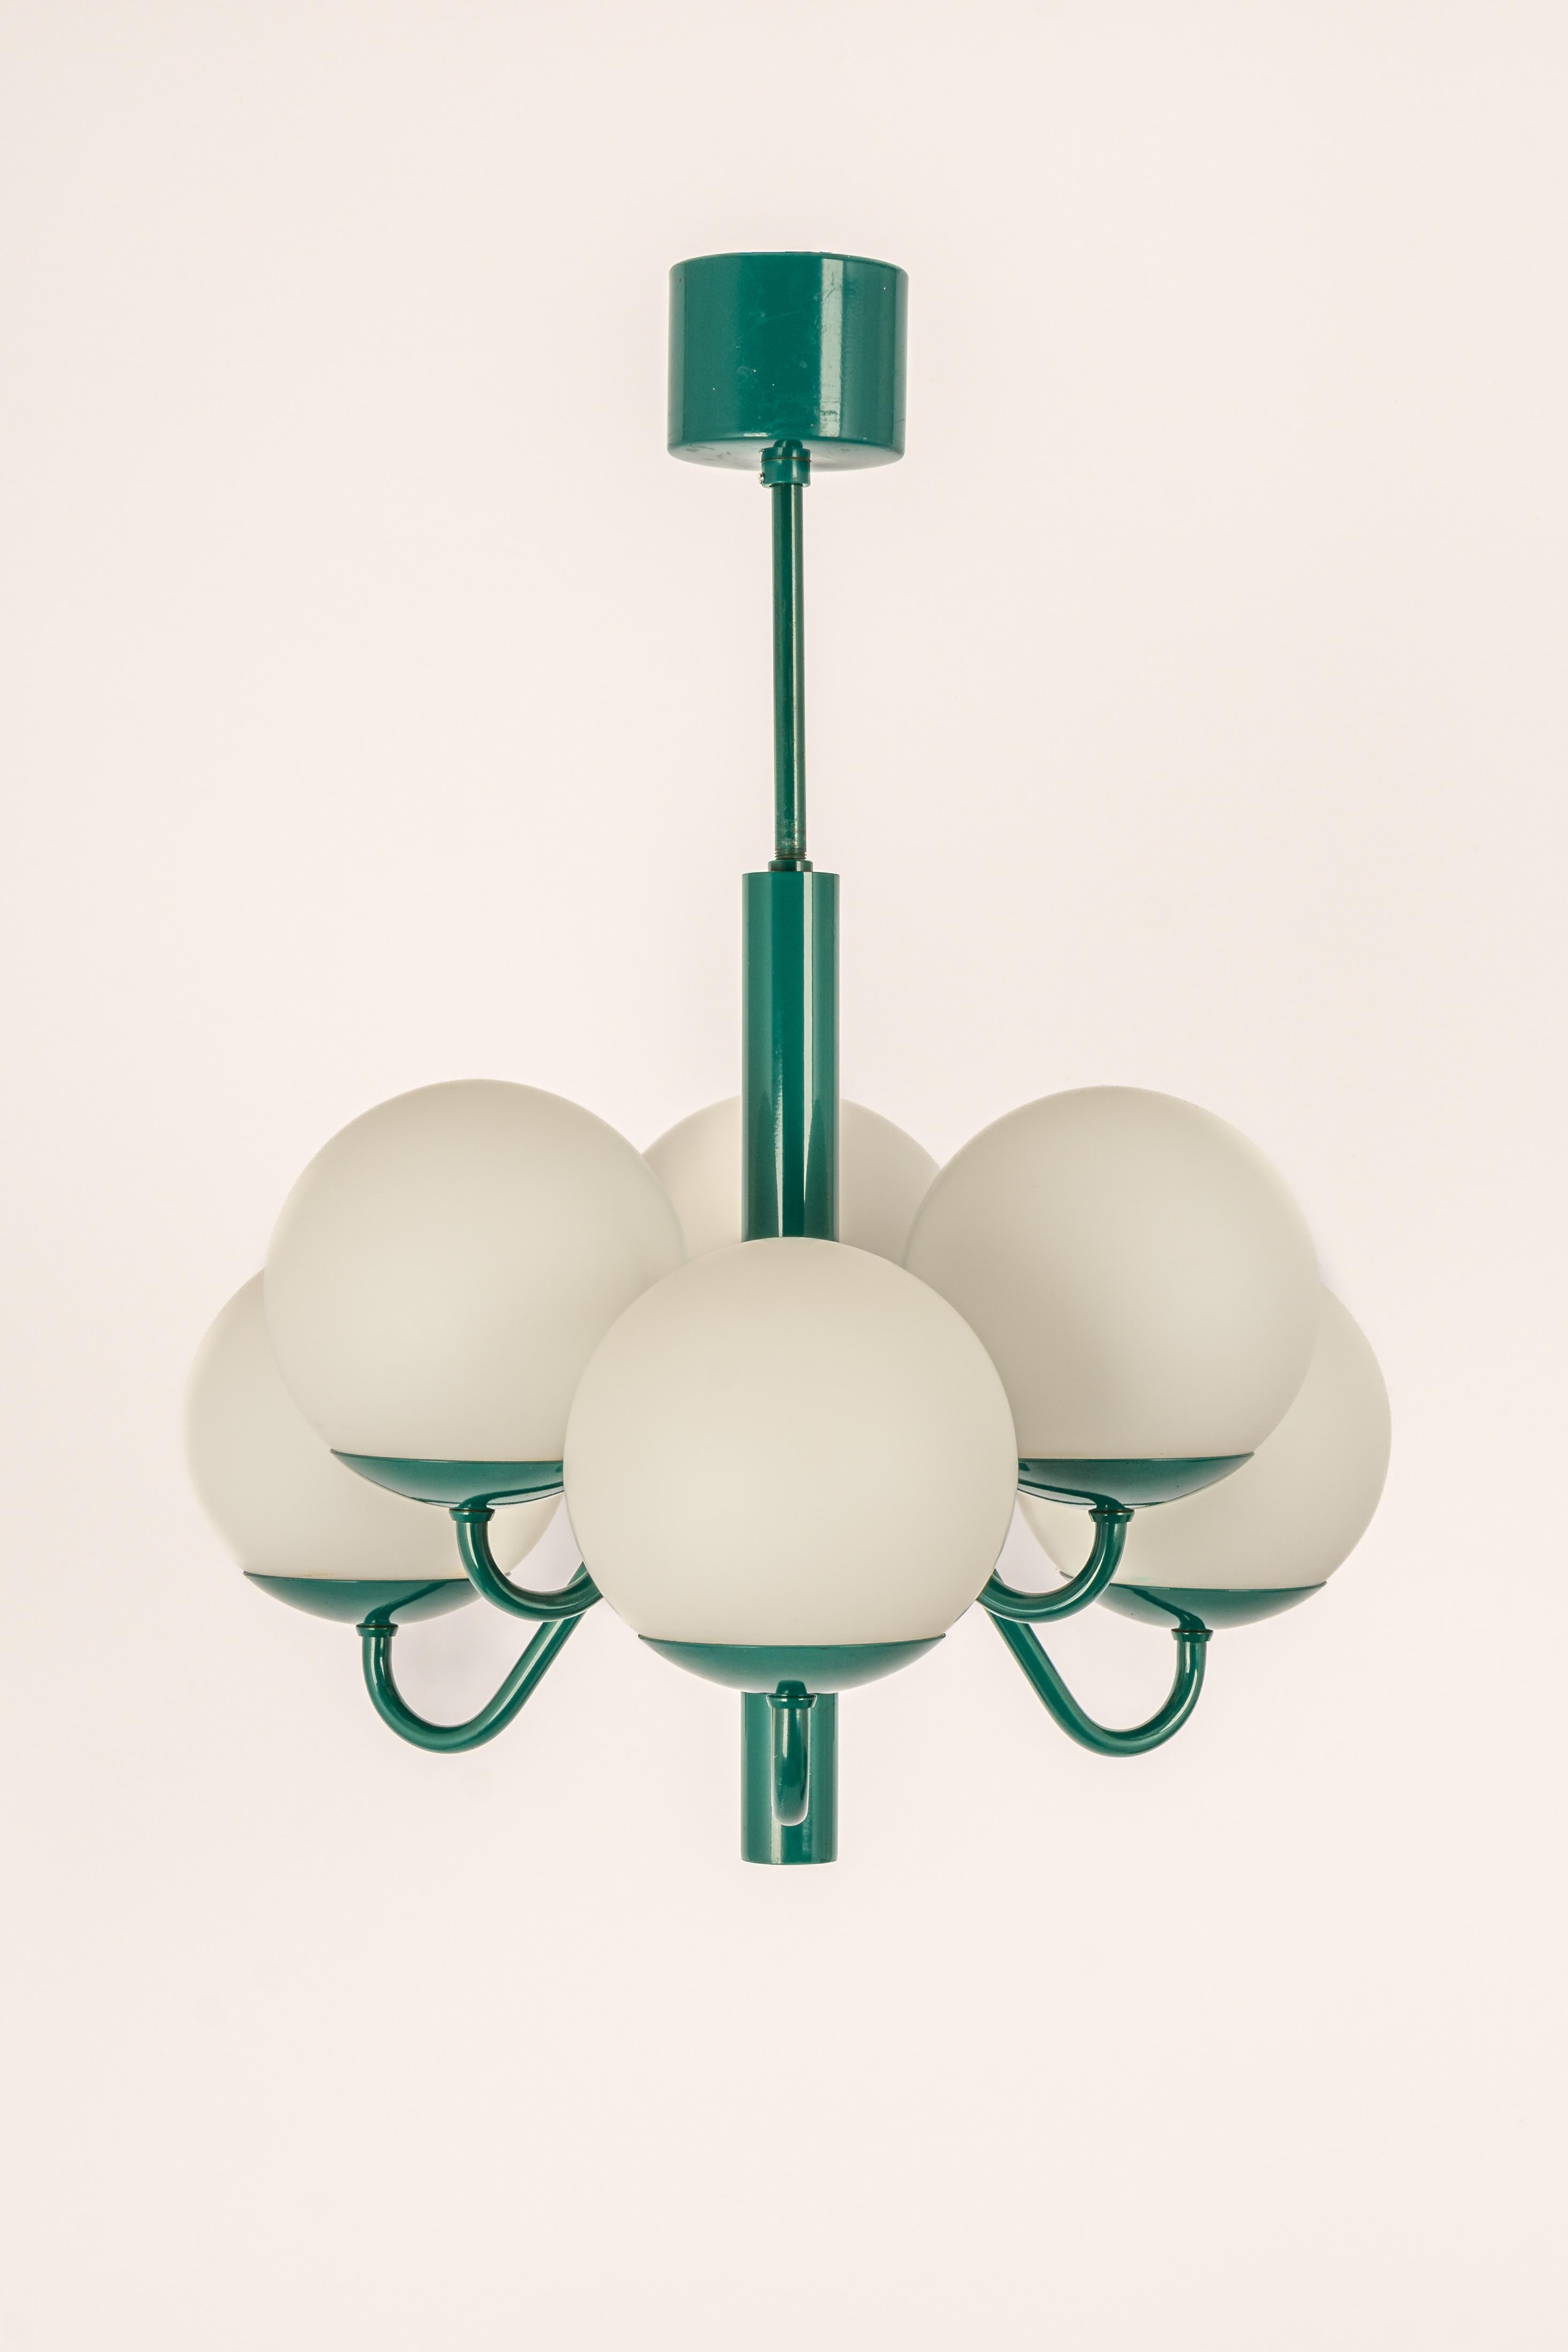 Wonderful Sputnik pendant light made by Kaiser Leuchten, Germany, circa 1970-1979.
Great Atomium-shaped chandelier with 6 opal glasses.

High quality and in very good condition. Cleaned, well-wired, and ready to use. 

Each fixture requires 6 x